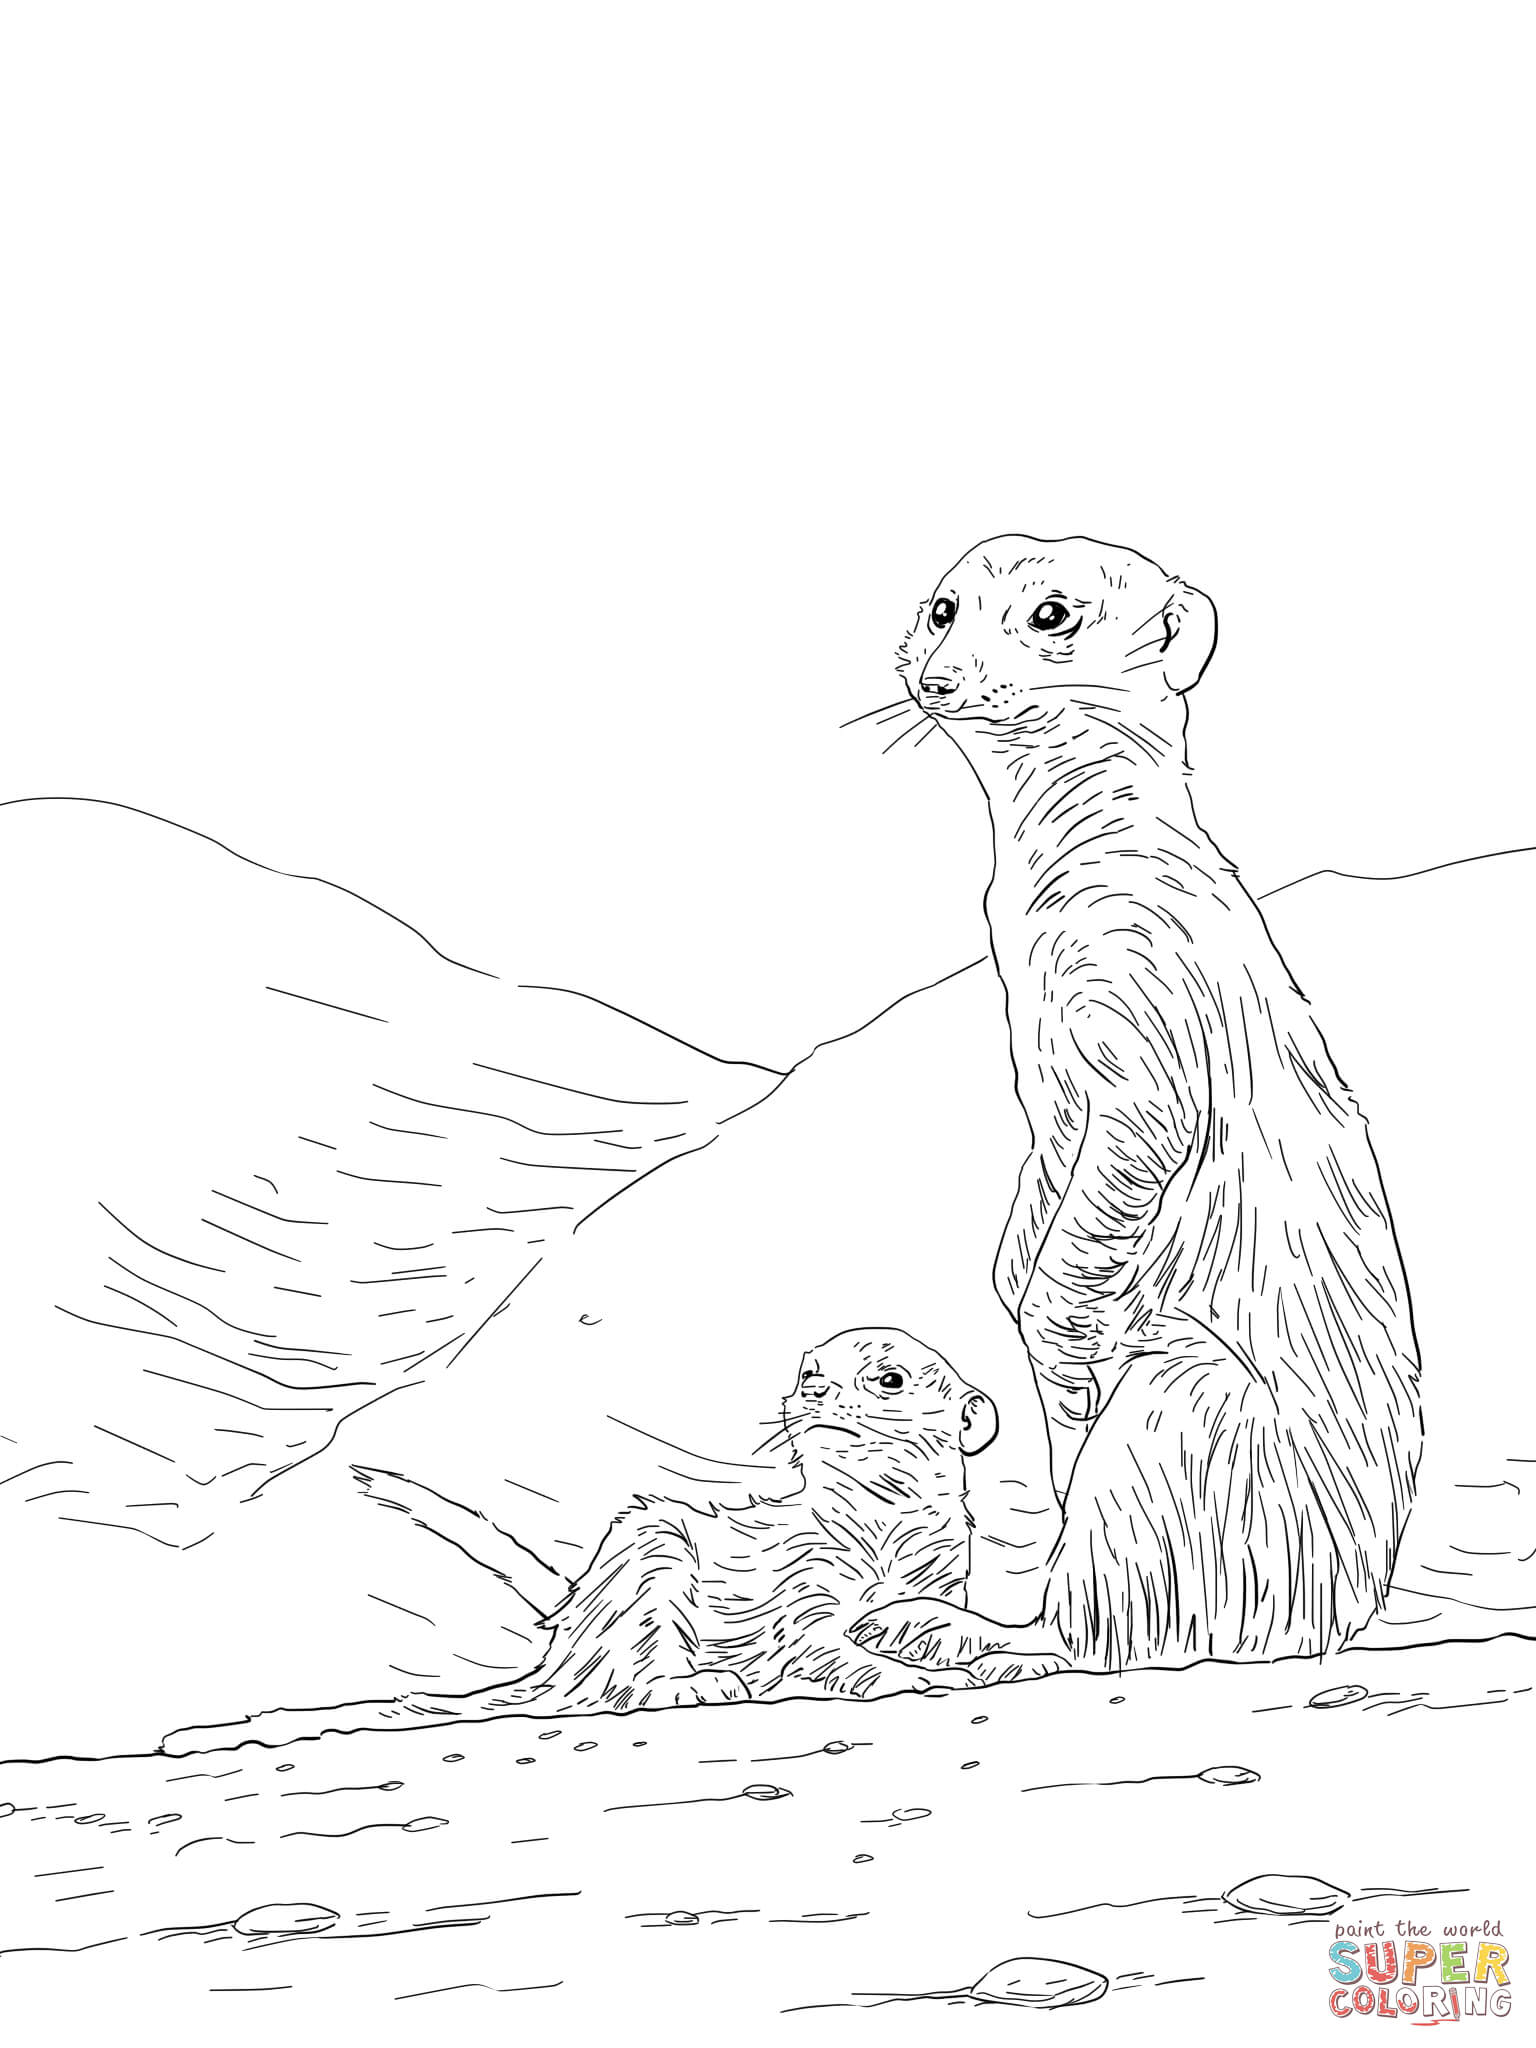 Meerkats coloring pages | Free Coloring Pages